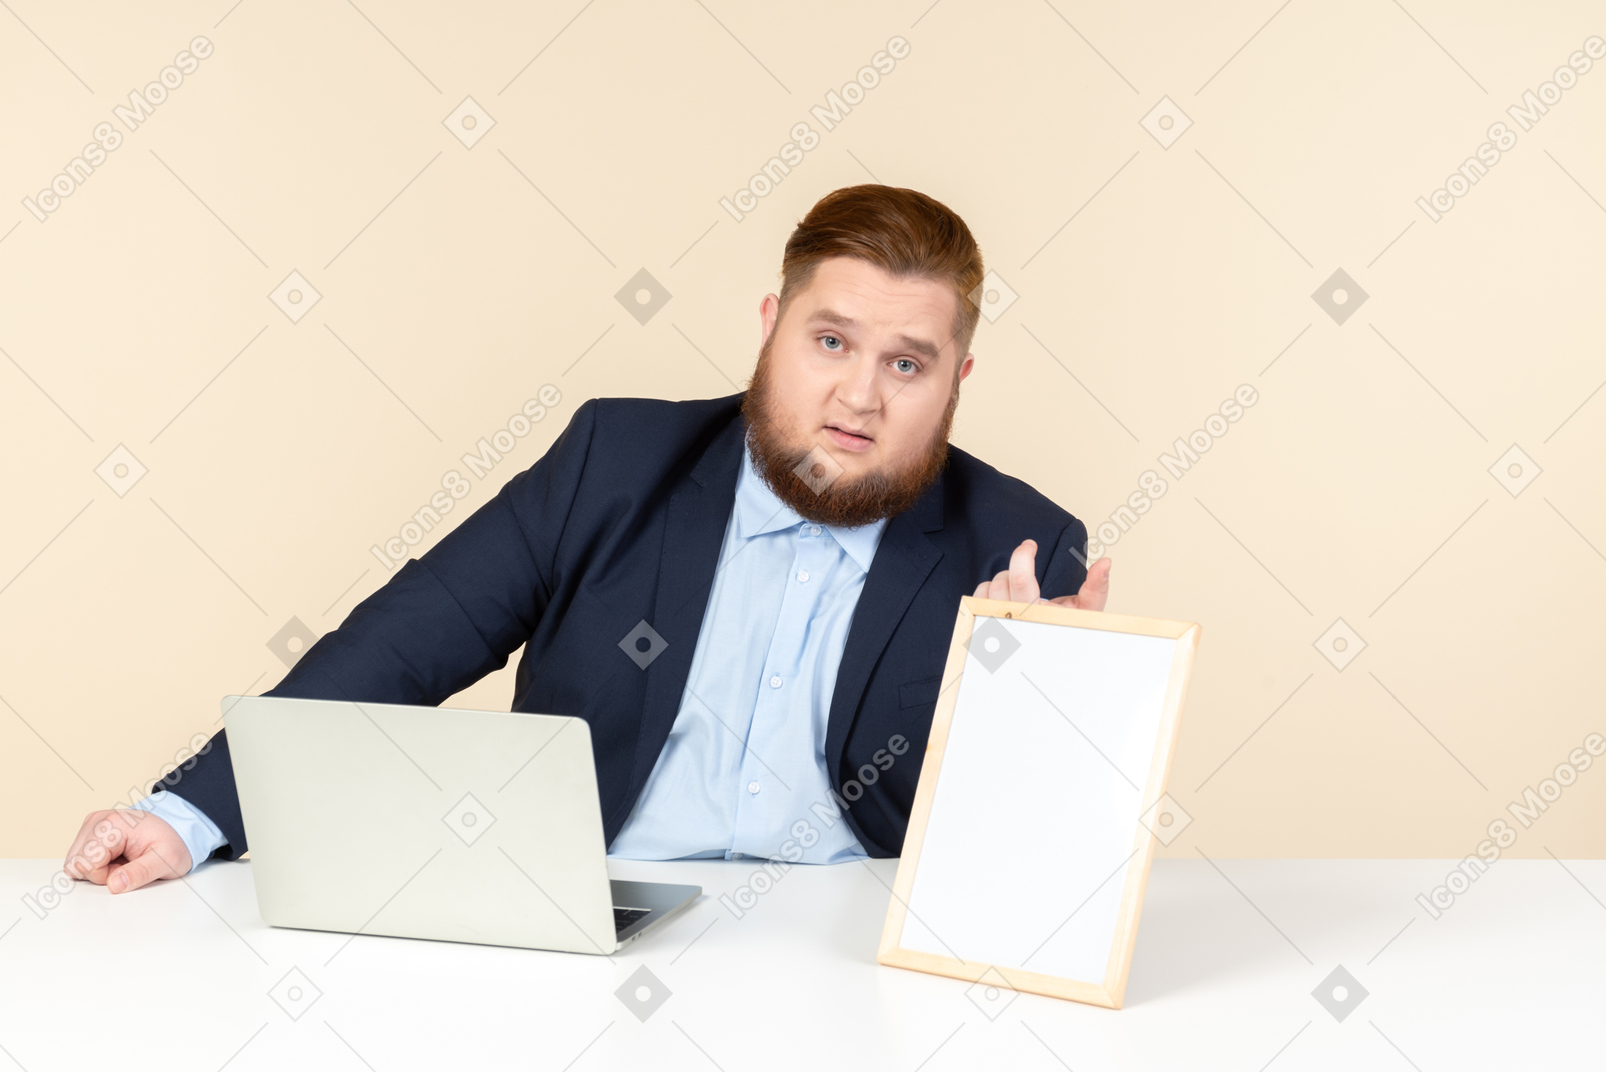 Young overweight man sitting at the desk and holding white picture frame